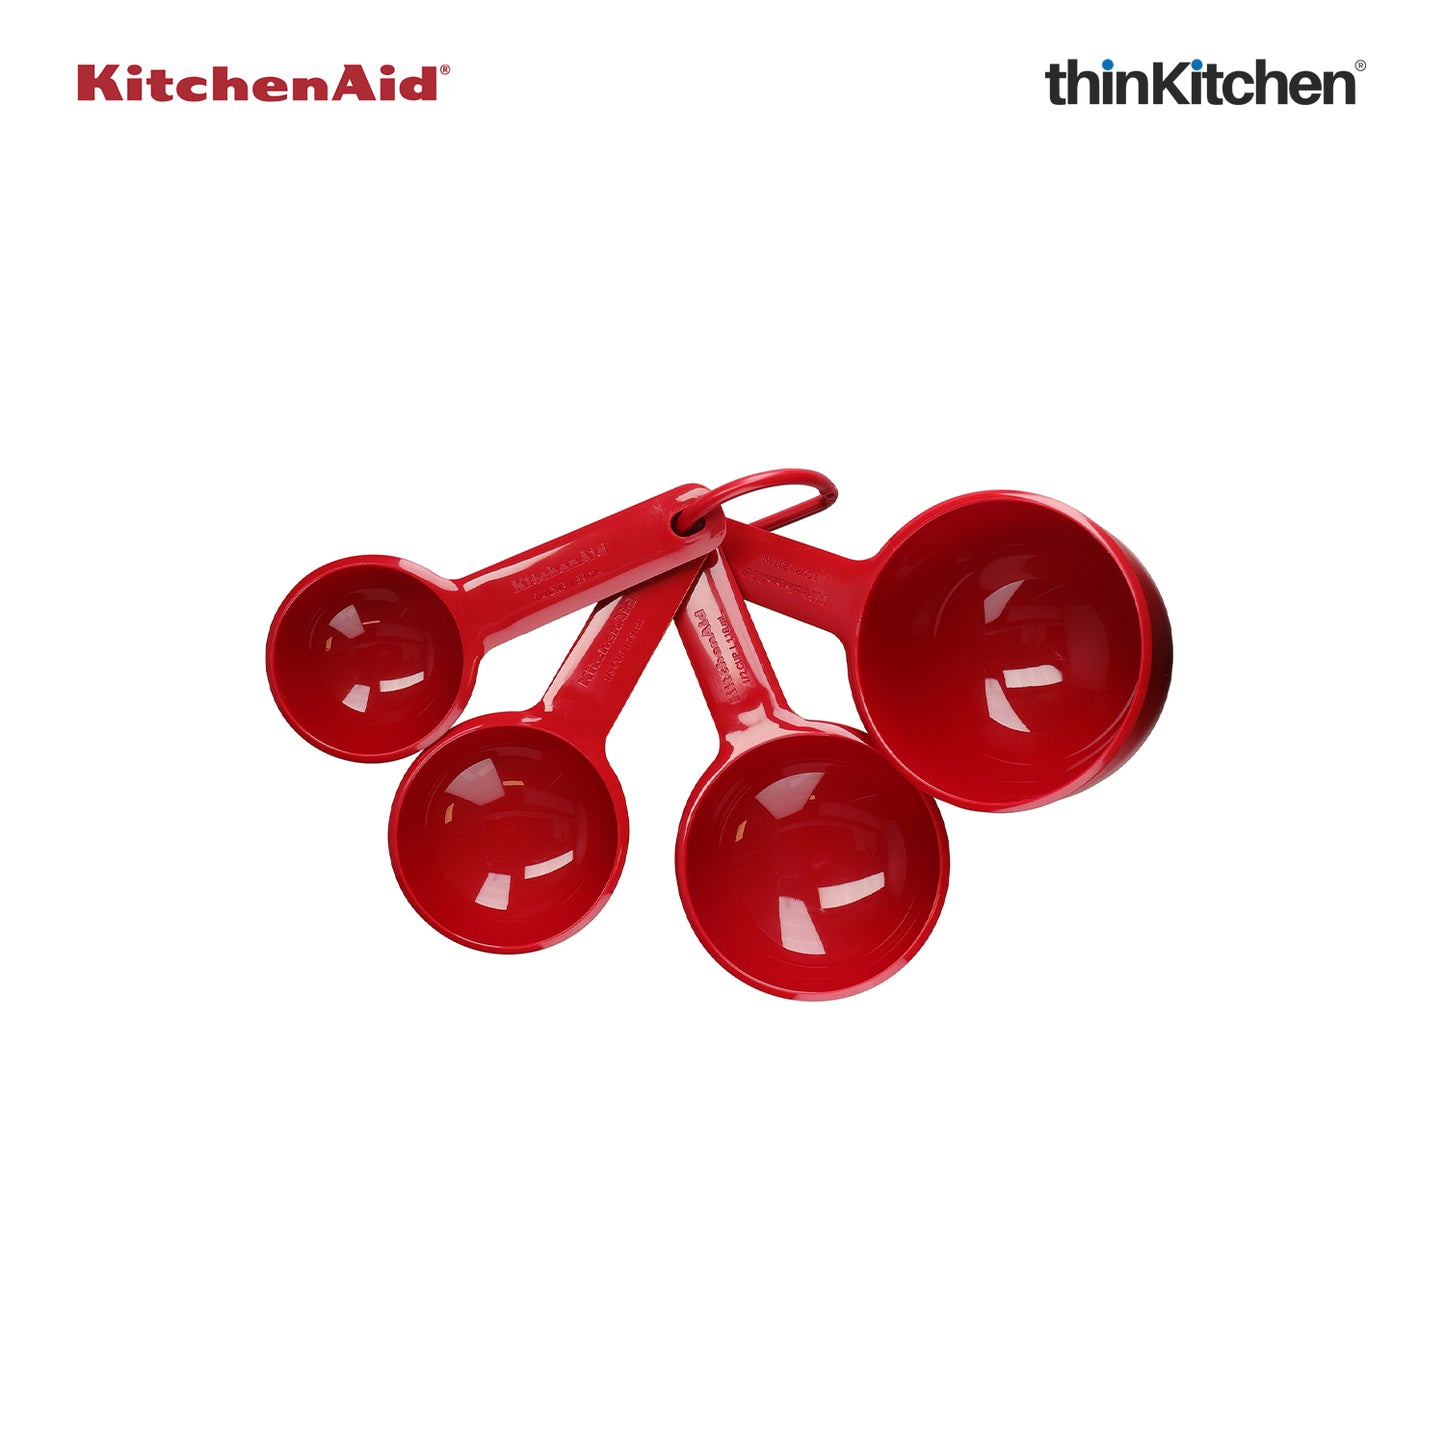 Kitchenaid 4 Pc Measuring Cup Set Empire Red